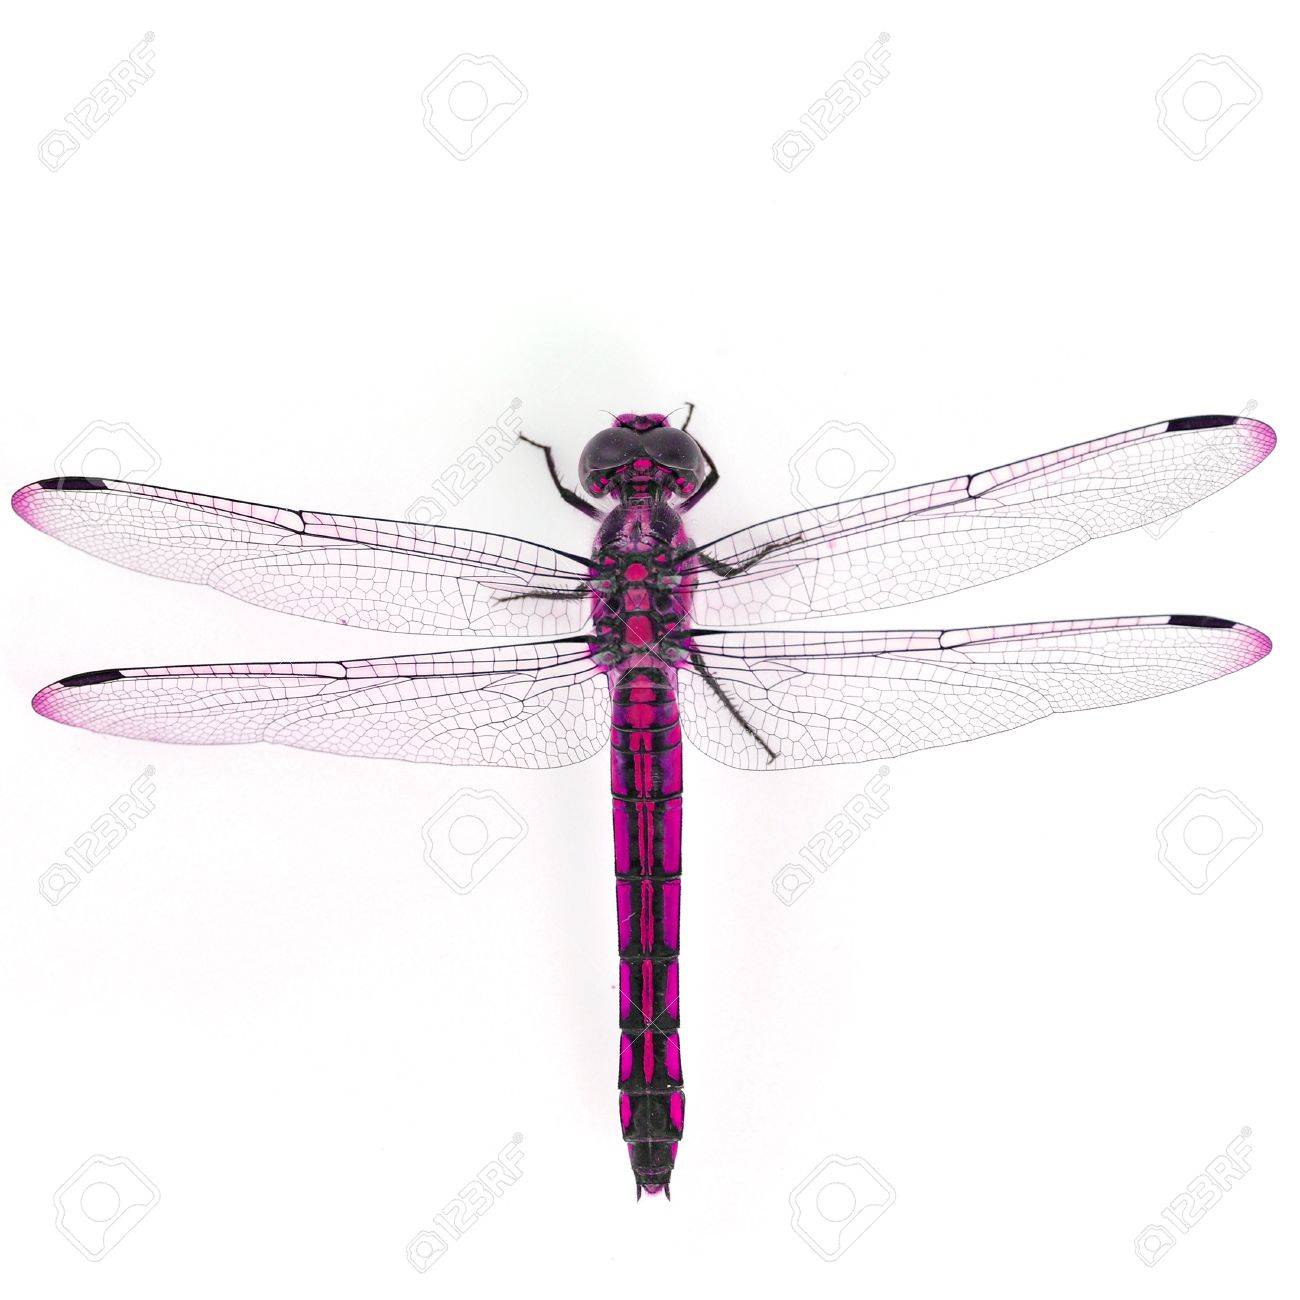 Beautiful Dragonfly On White Background Stock Photo Picture And